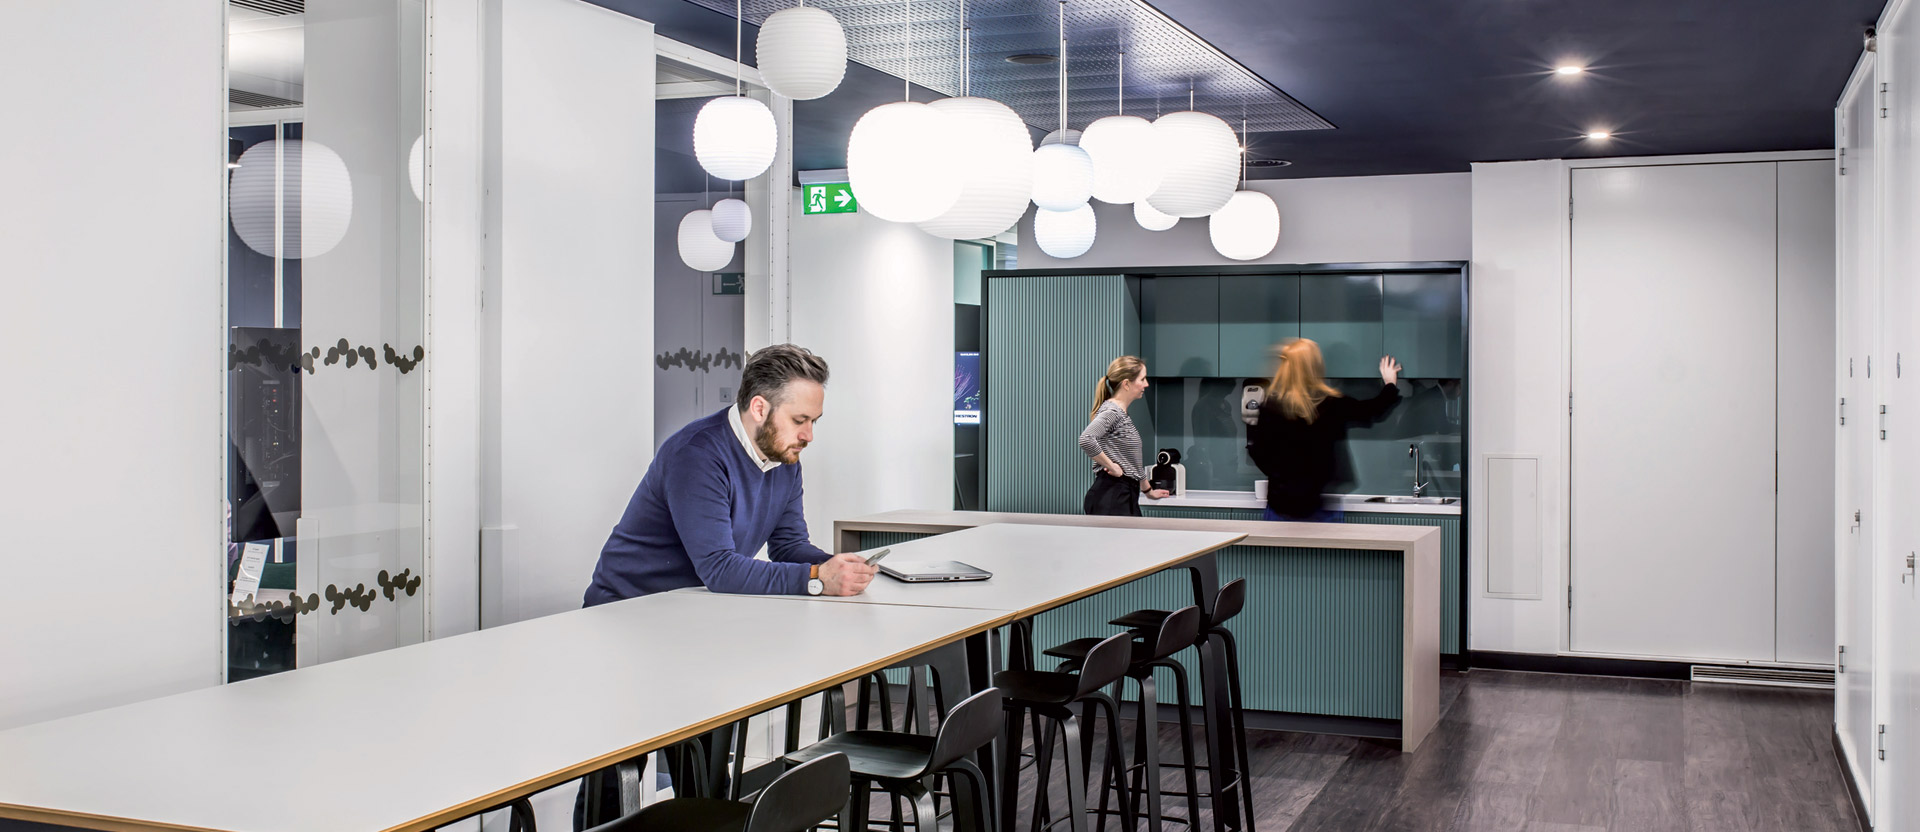 Modern office break room featuring teal cabinetry, sleek black countertops, and a variety of globe pendant lights suspended at varying heights. Professionals engage in work and conversation, emphasizing a functional yet stylish workspace designed for interaction and comfort.